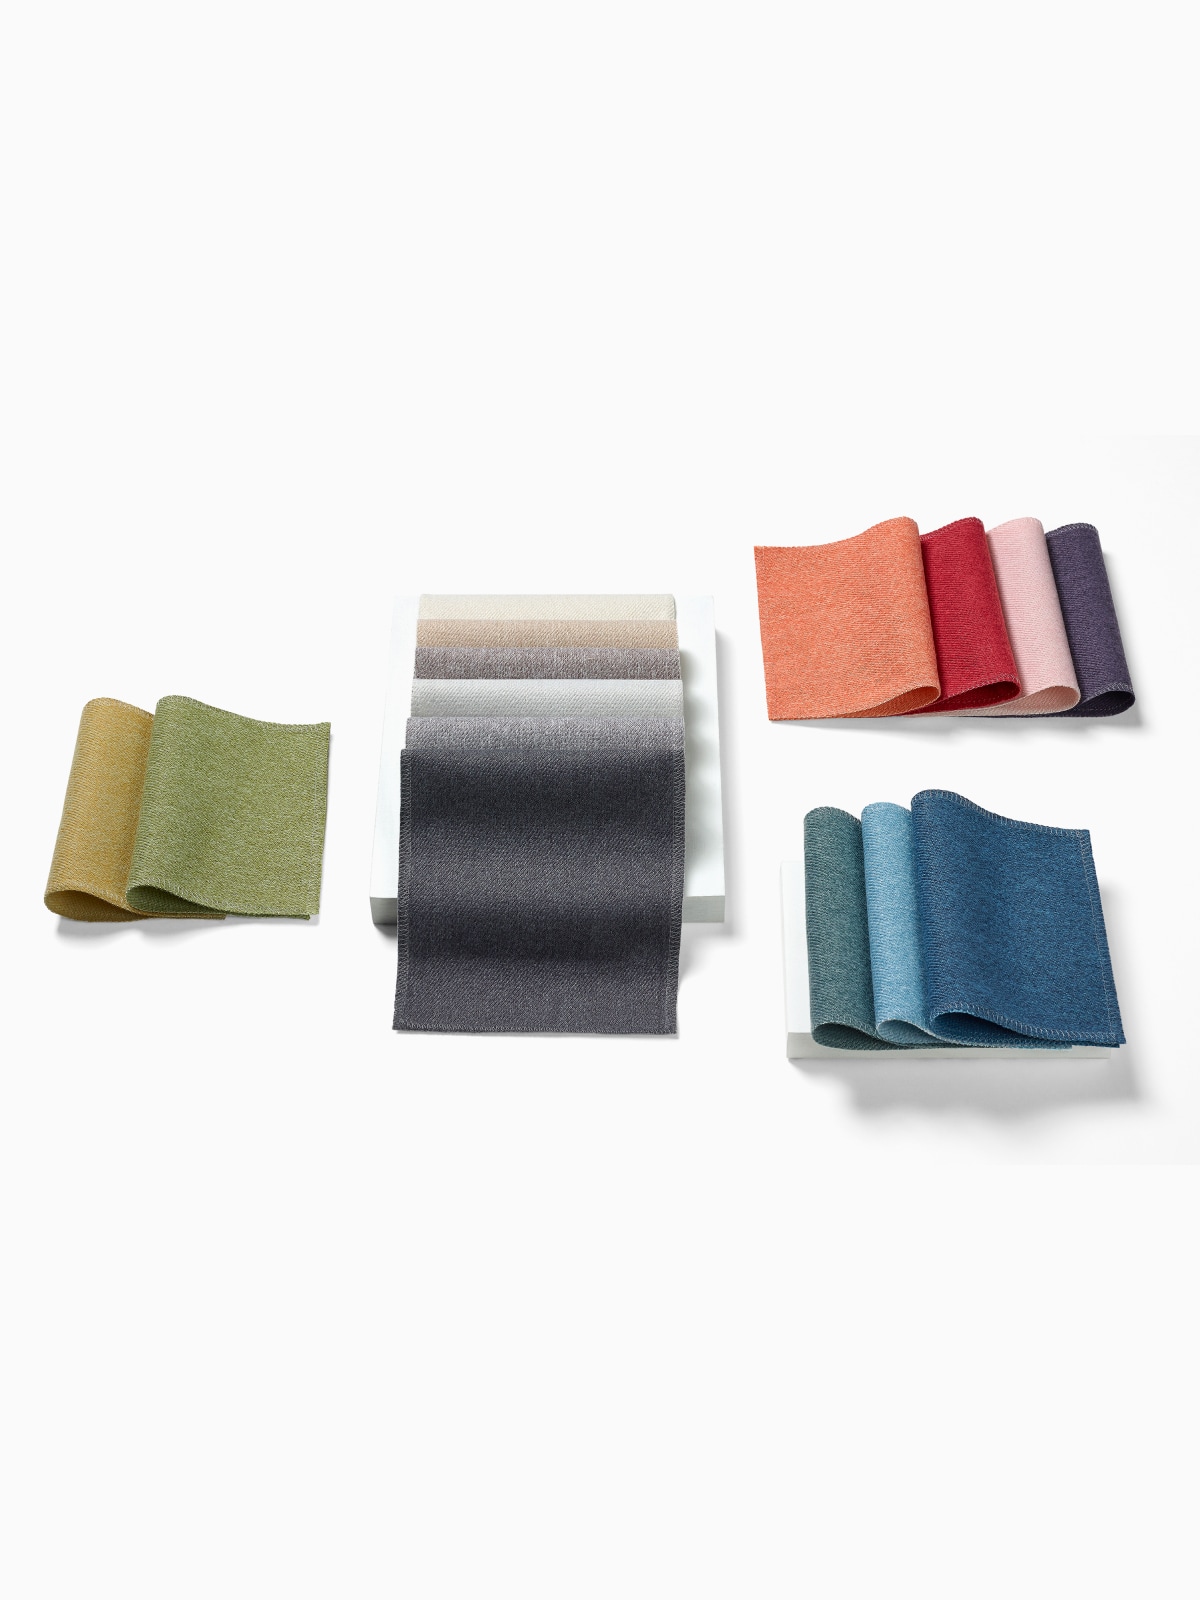 A top view of multiple, folded colorful Whisper fabrics.